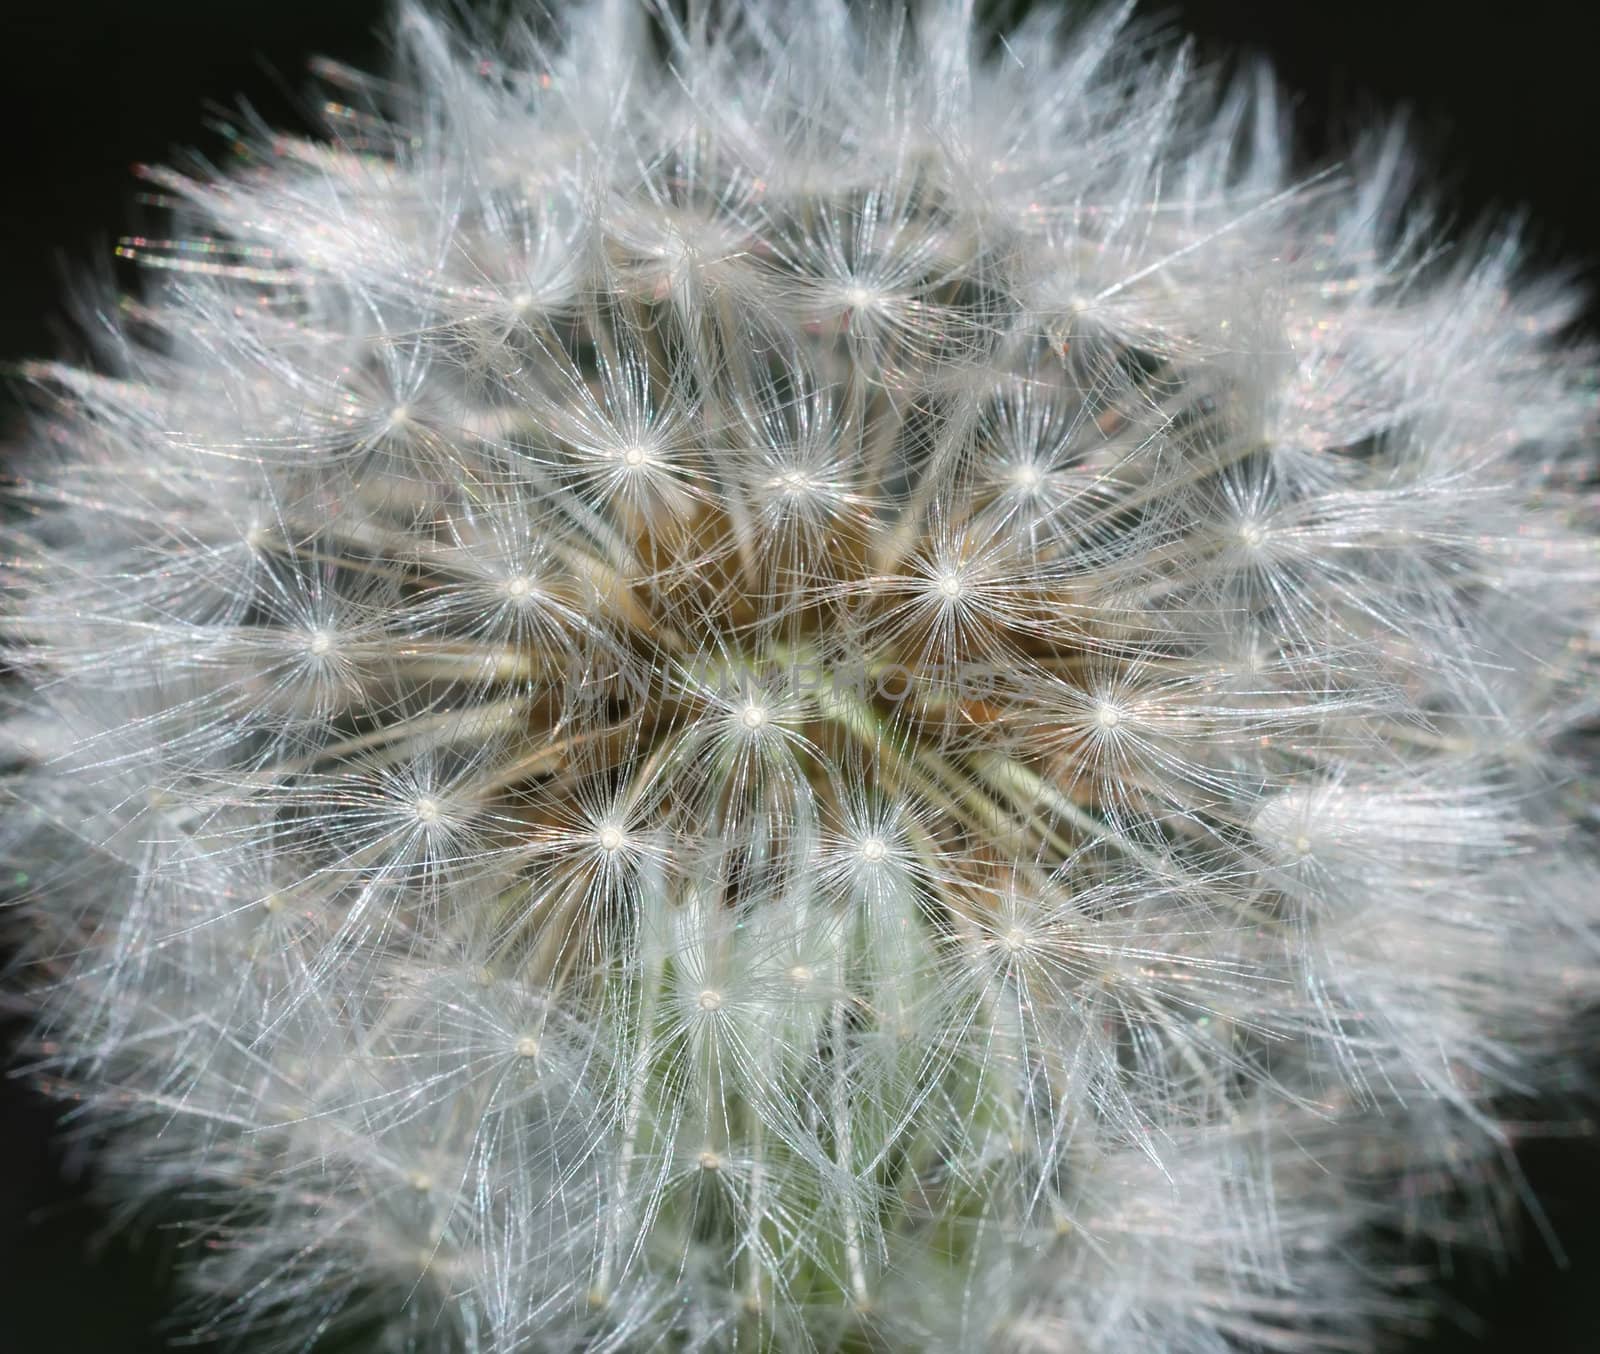 A close up of a head of a dandelion